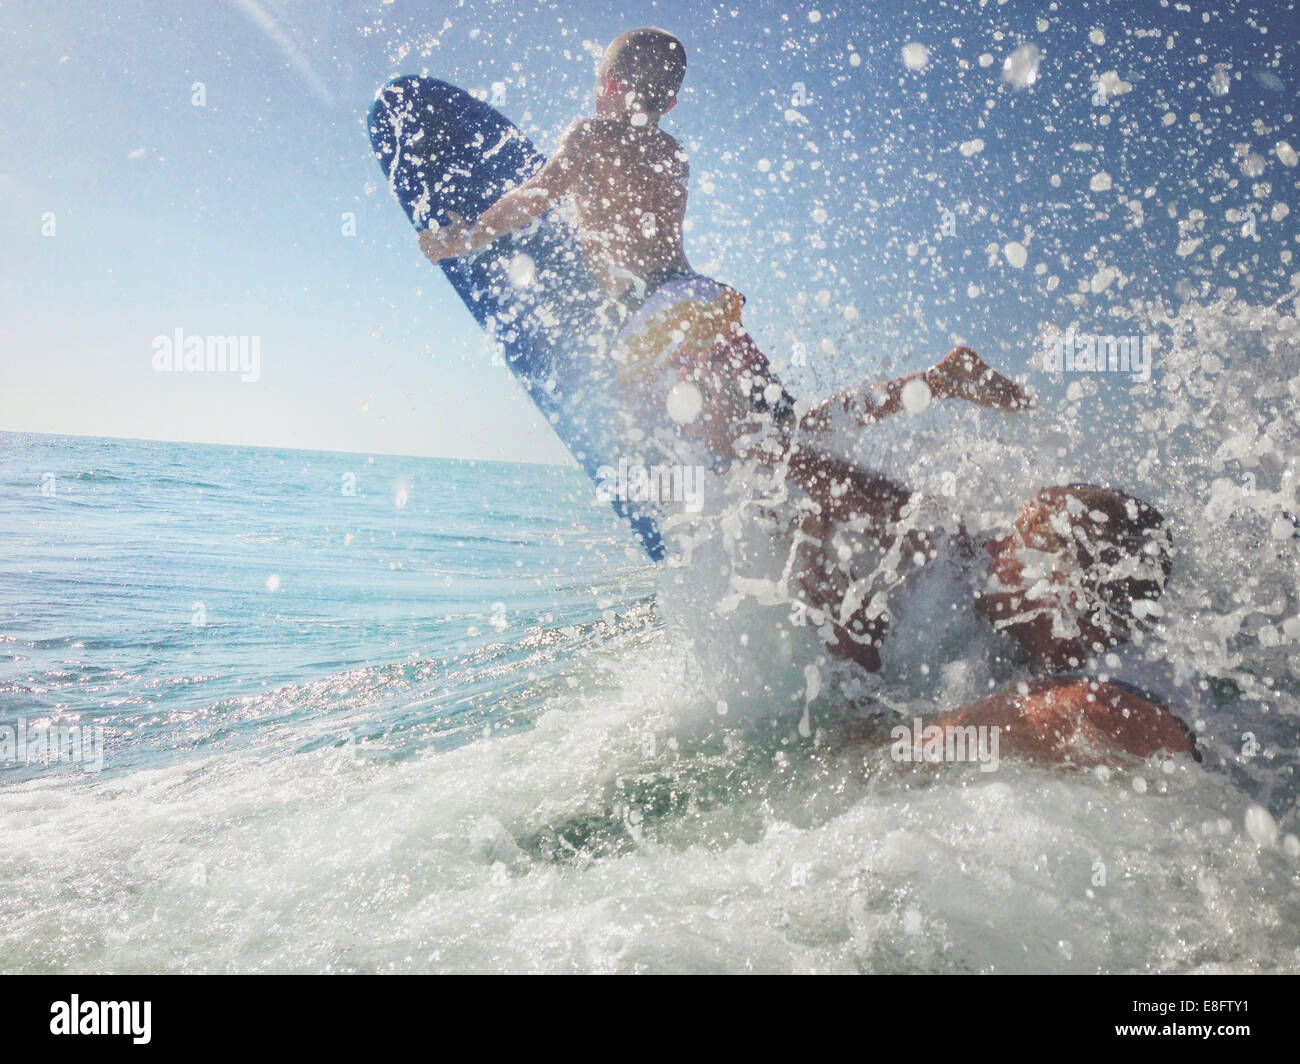 Father and son playing in ocean with surfboard, California, USA Stock Photo